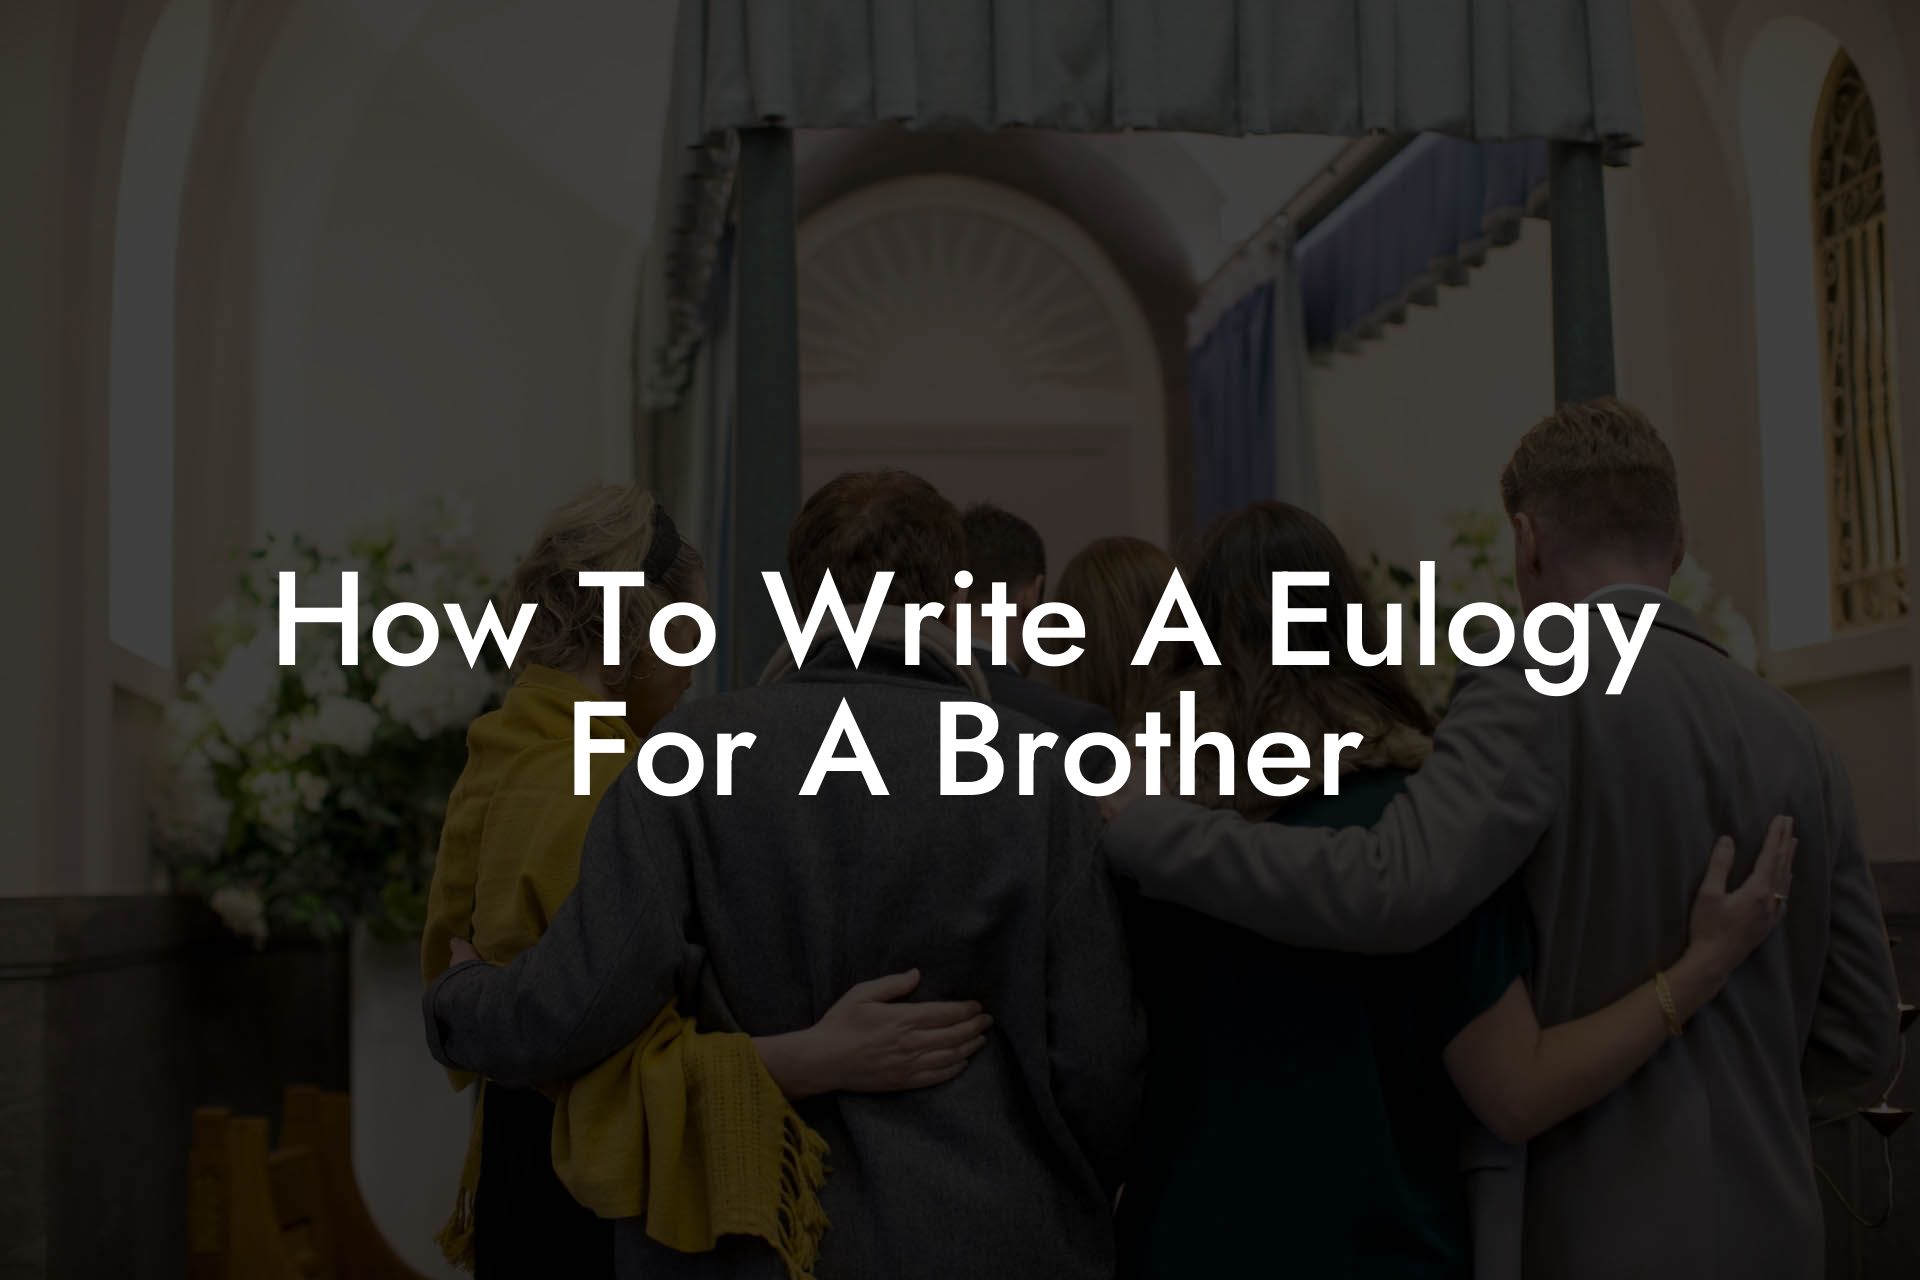 How To Write A Eulogy For A Brother